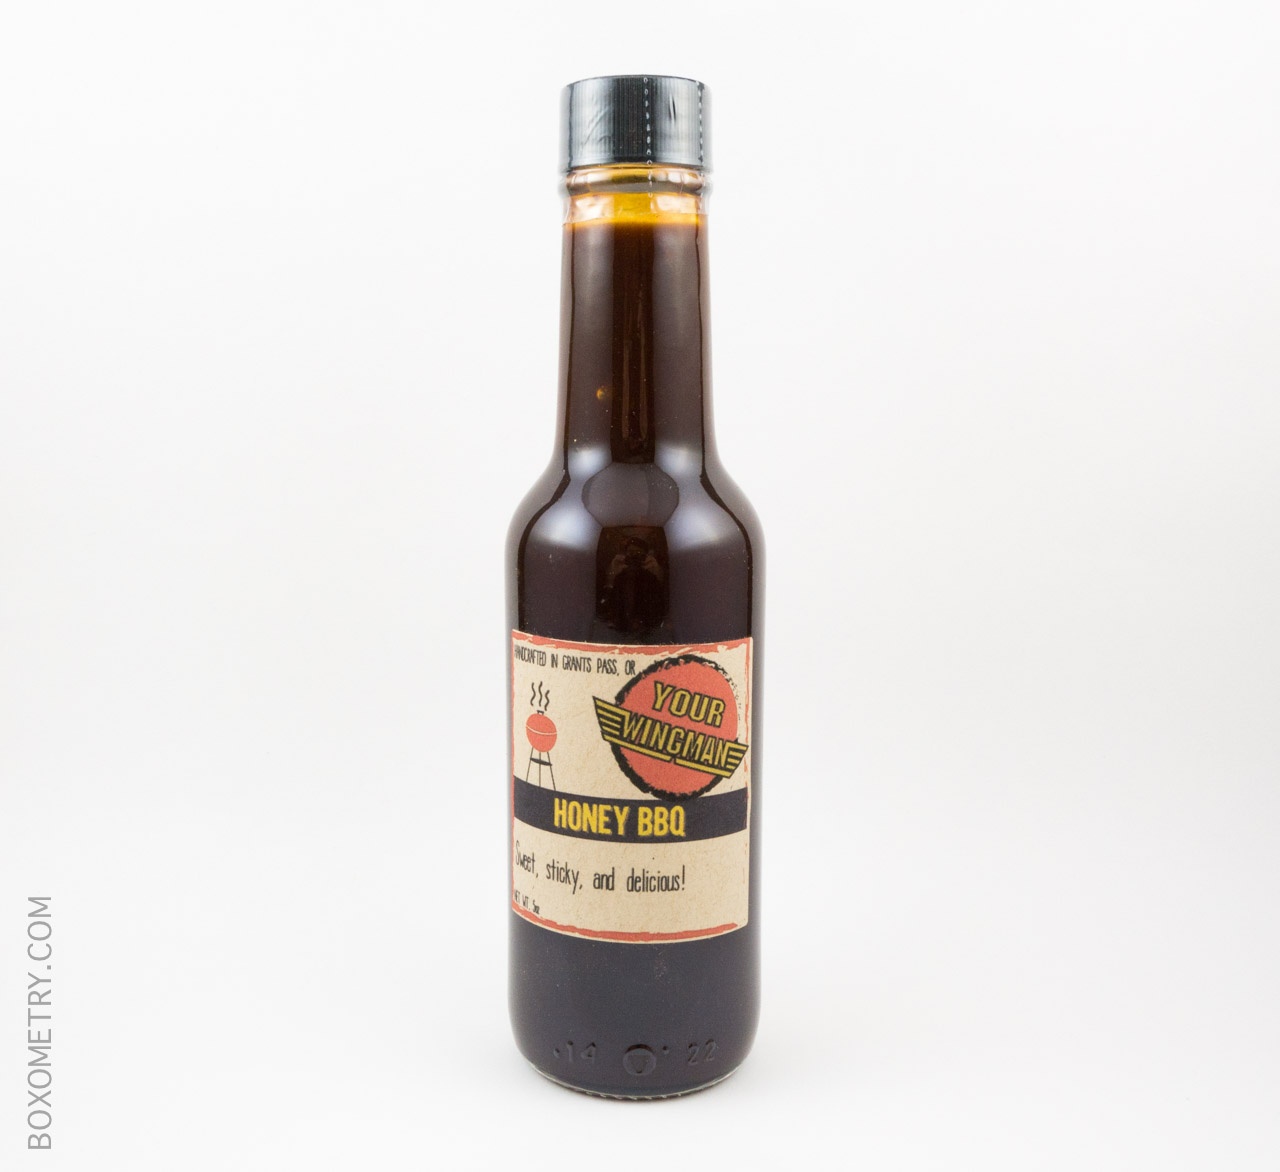 Boxometry Prospurly July 2015 Review - Your Wingman Honey BBQ Sauce